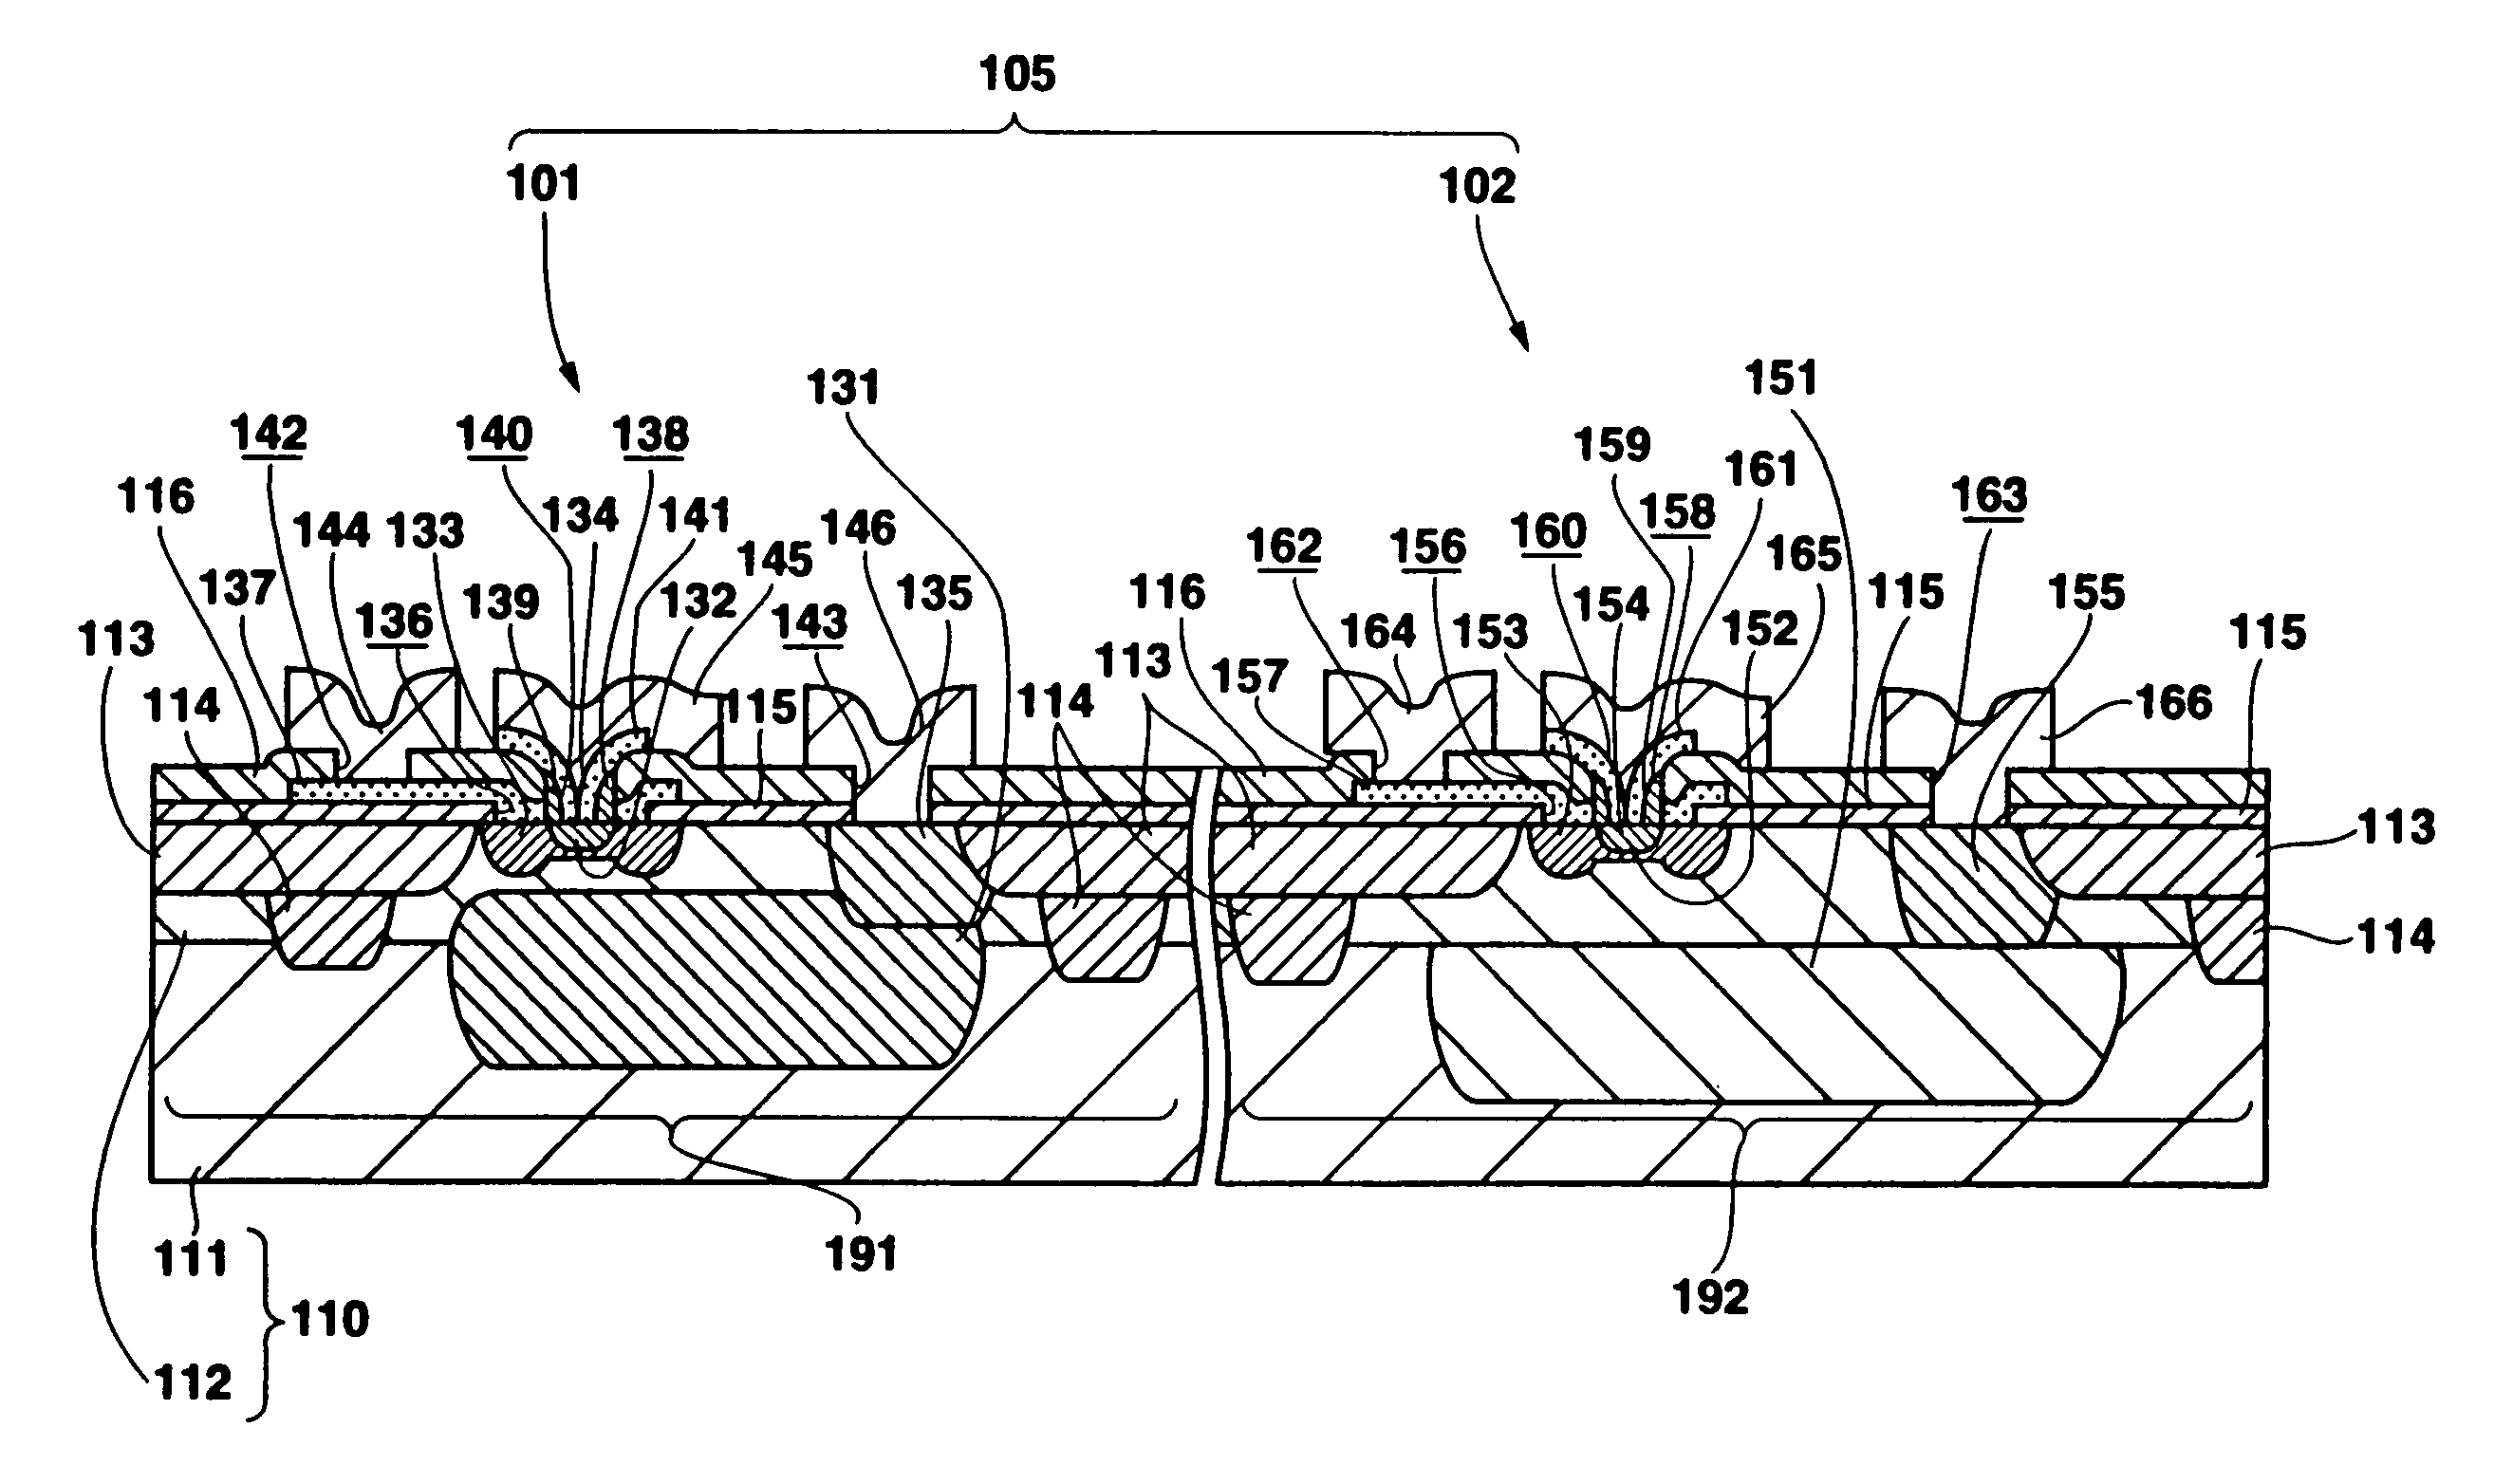 Semiconductor device including high speed transistors and high voltage transistors disposed on a single substrate